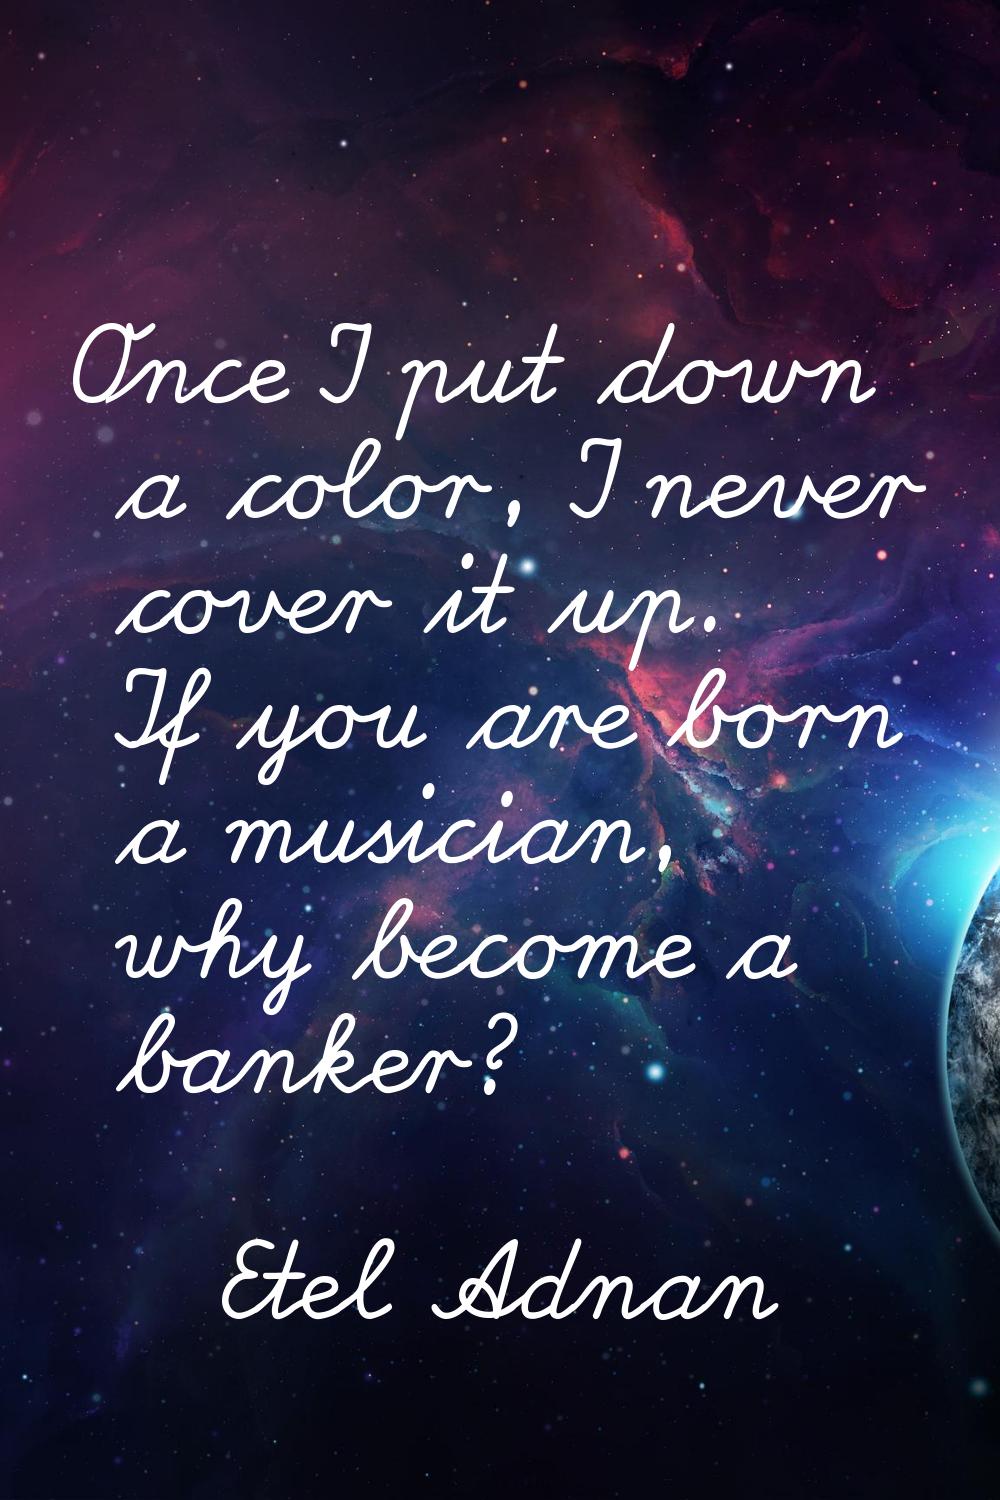 Once I put down a color, I never cover it up. If you are born a musician, why become a banker?